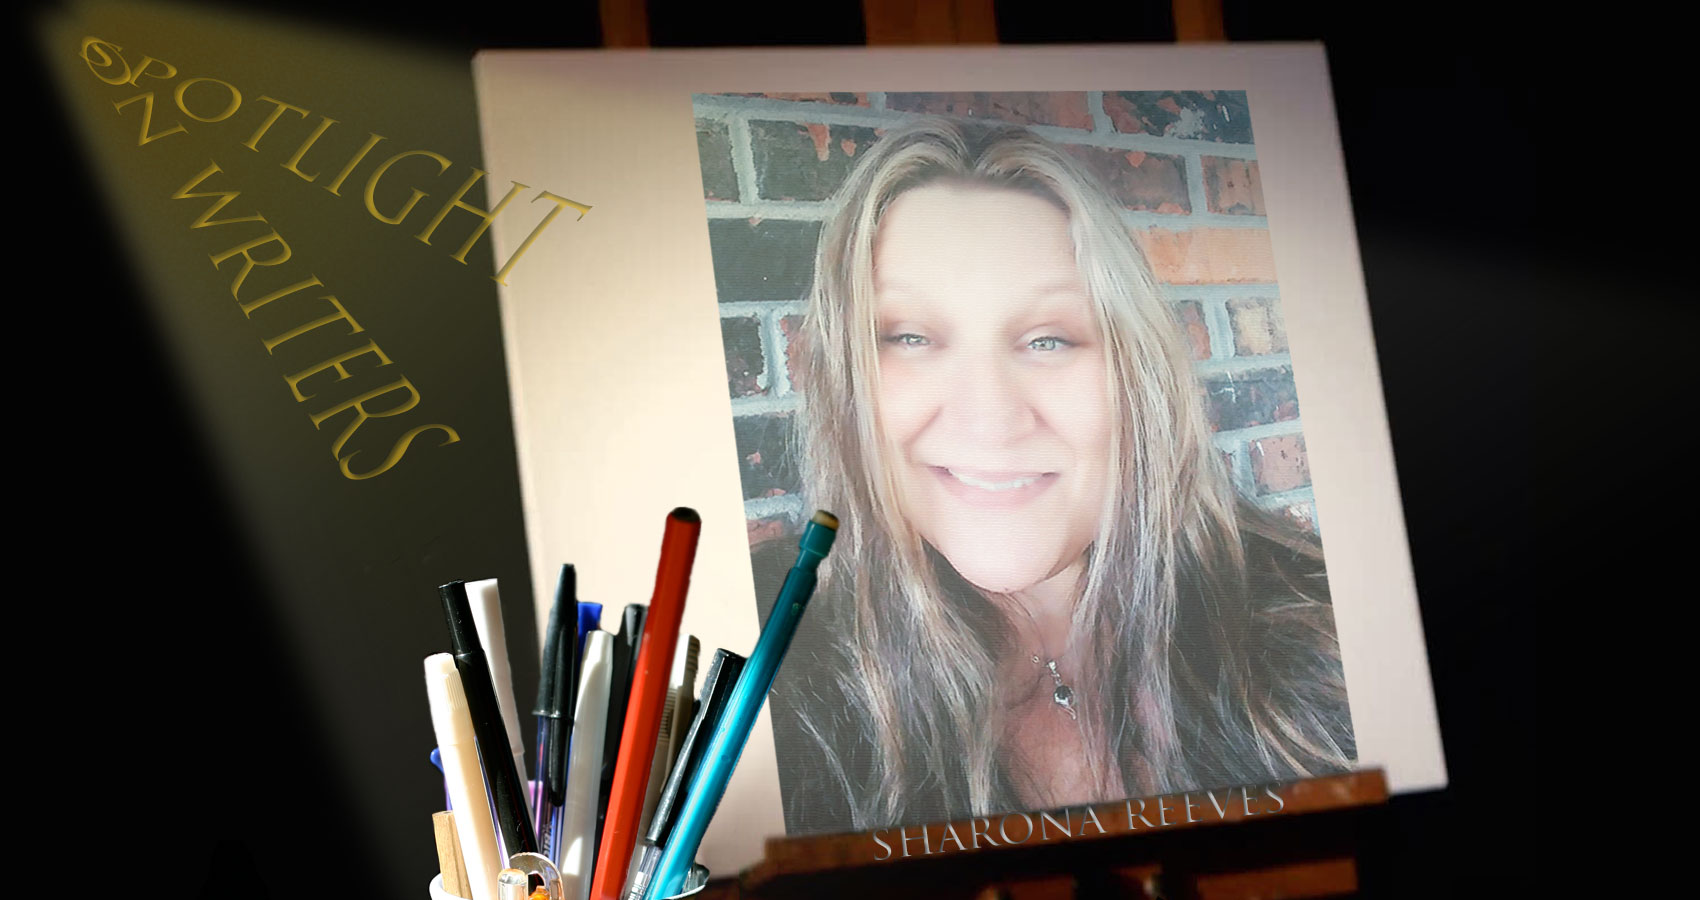 Spotlight On Writers - Sharona Reeves, interview at Spillwords.com